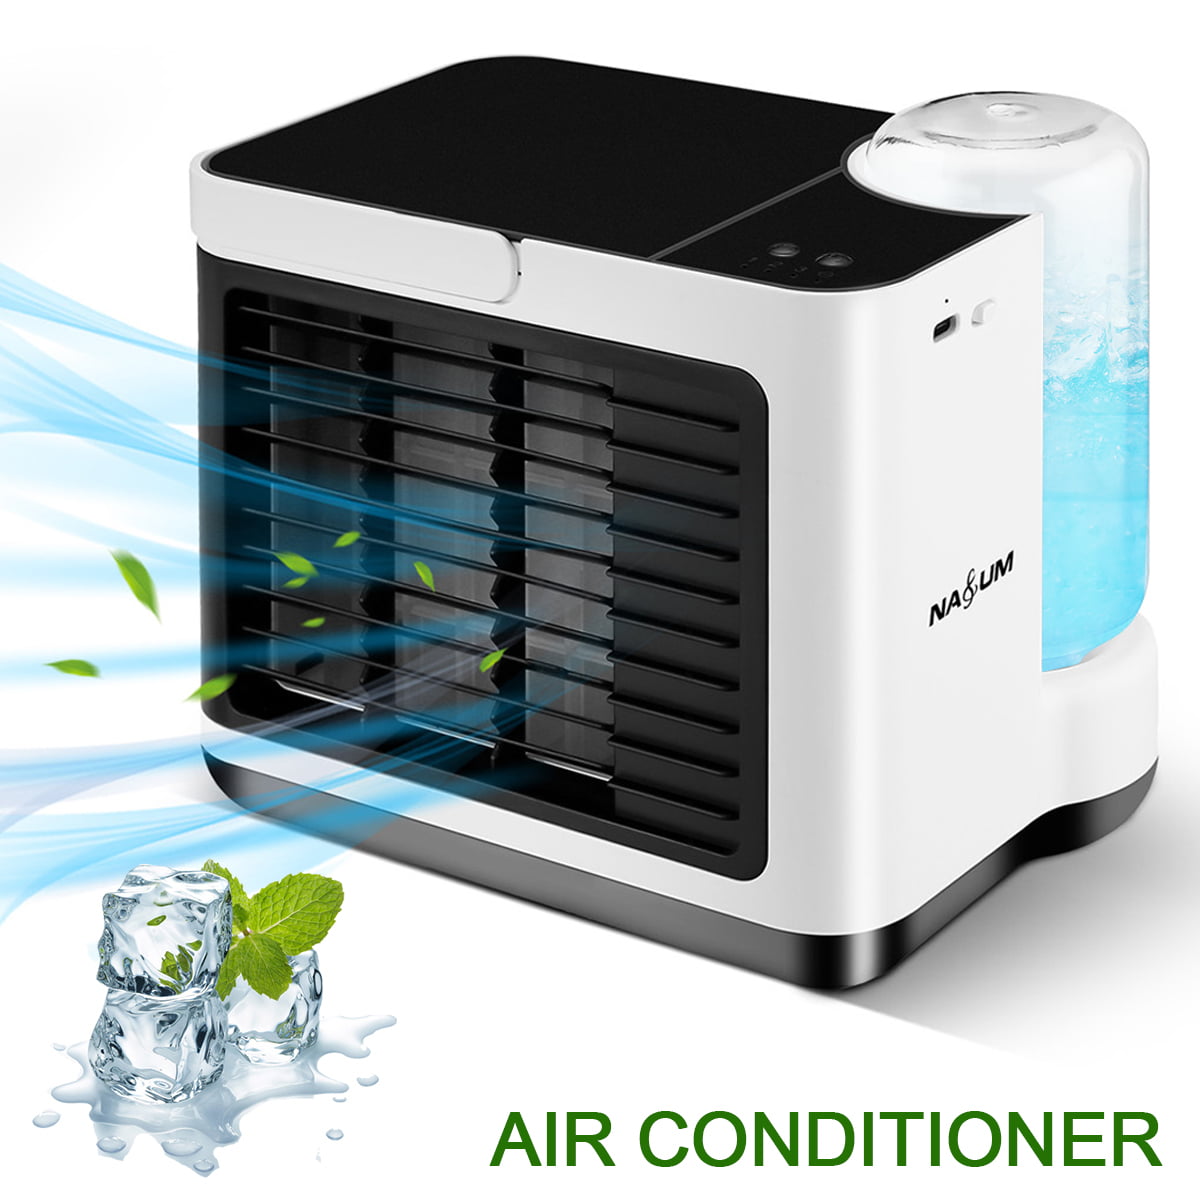 Portable Air Cooler 3-in-1 Small Air Conditioner Humidifier Purifier USB Mini Fan Evaporative Cooler for Office Bedroom Living Room 